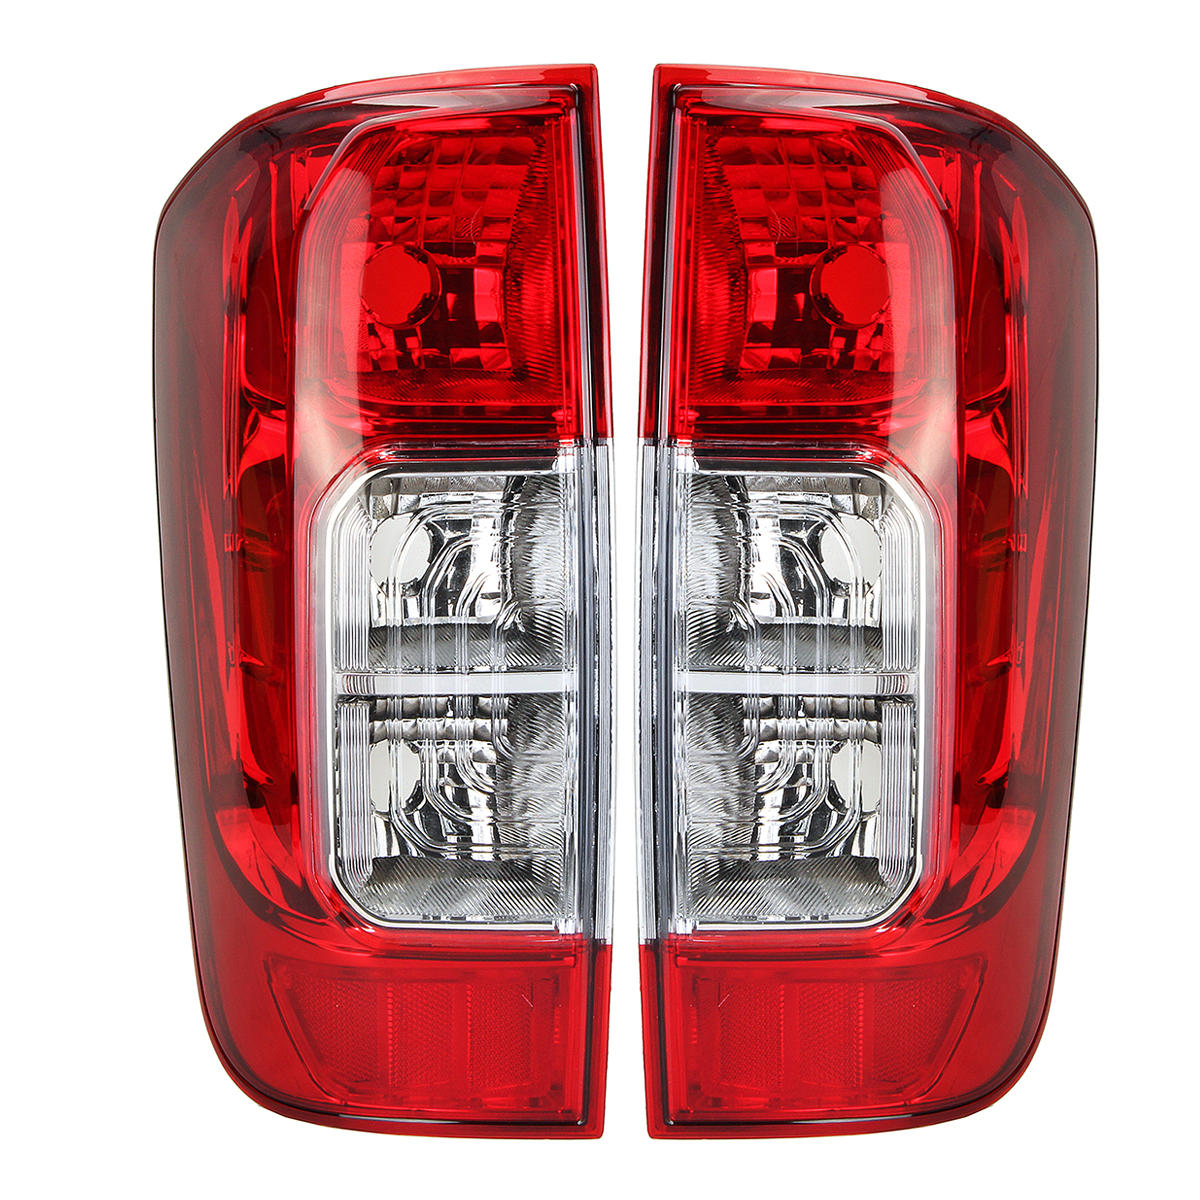 Car Tail Light Rear Brake Lamp Left/Right with No Bulb Wiring Harness For Nissan Navara NP300 D23 2015 On